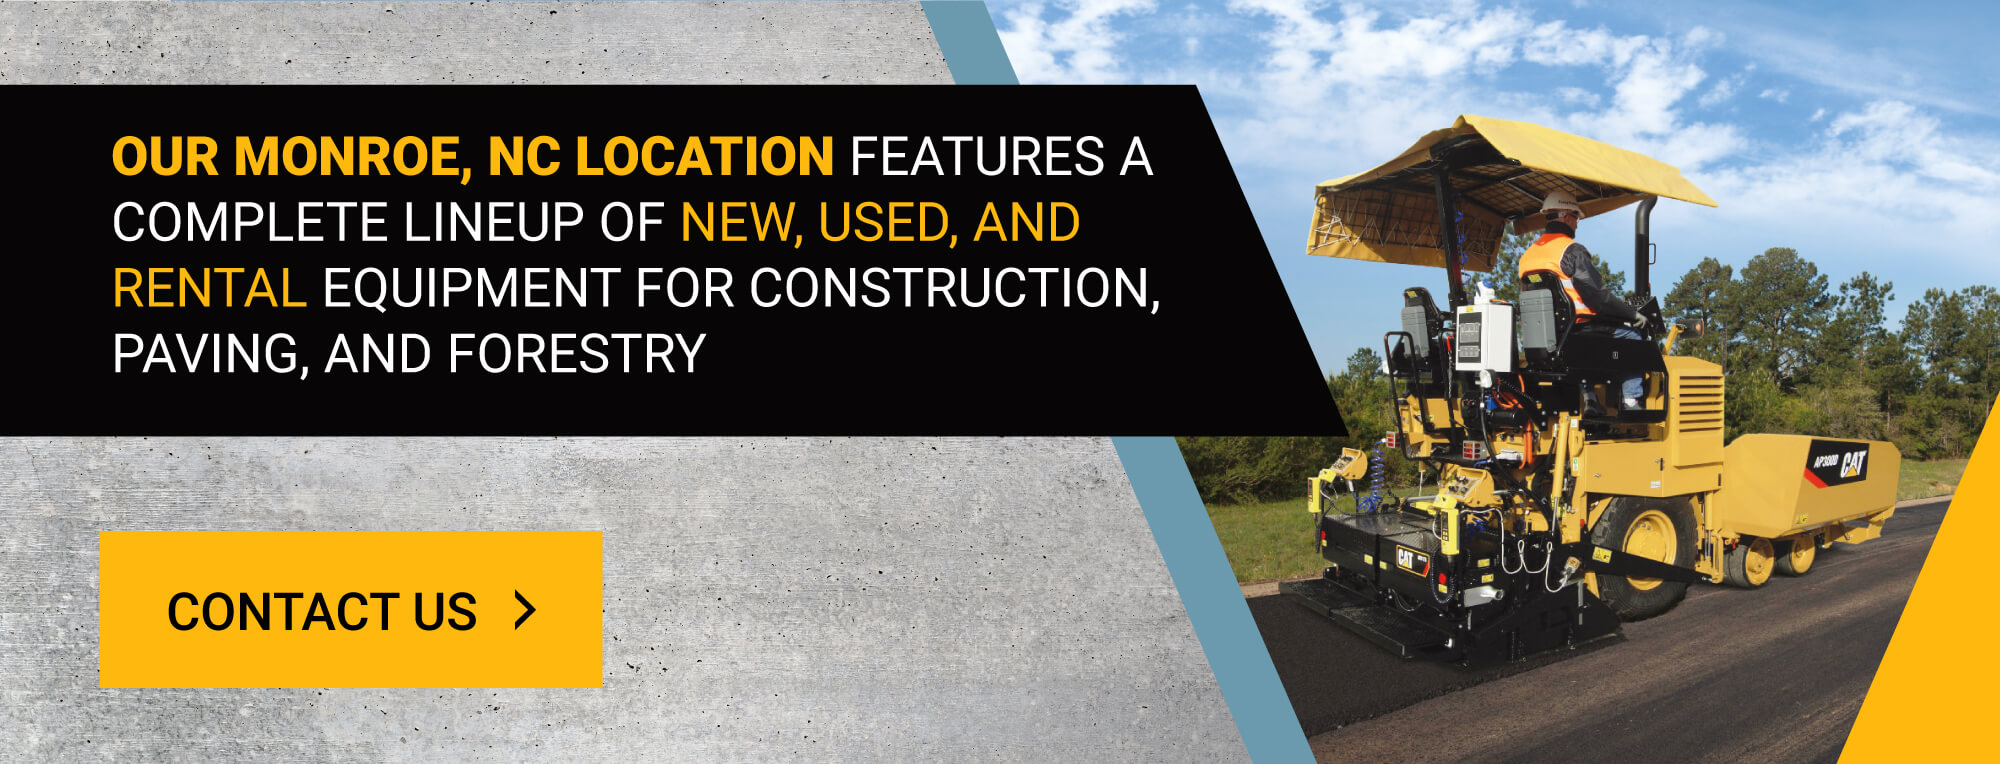 Cat® Construction Equipment in Monroe | New, Used & Rental